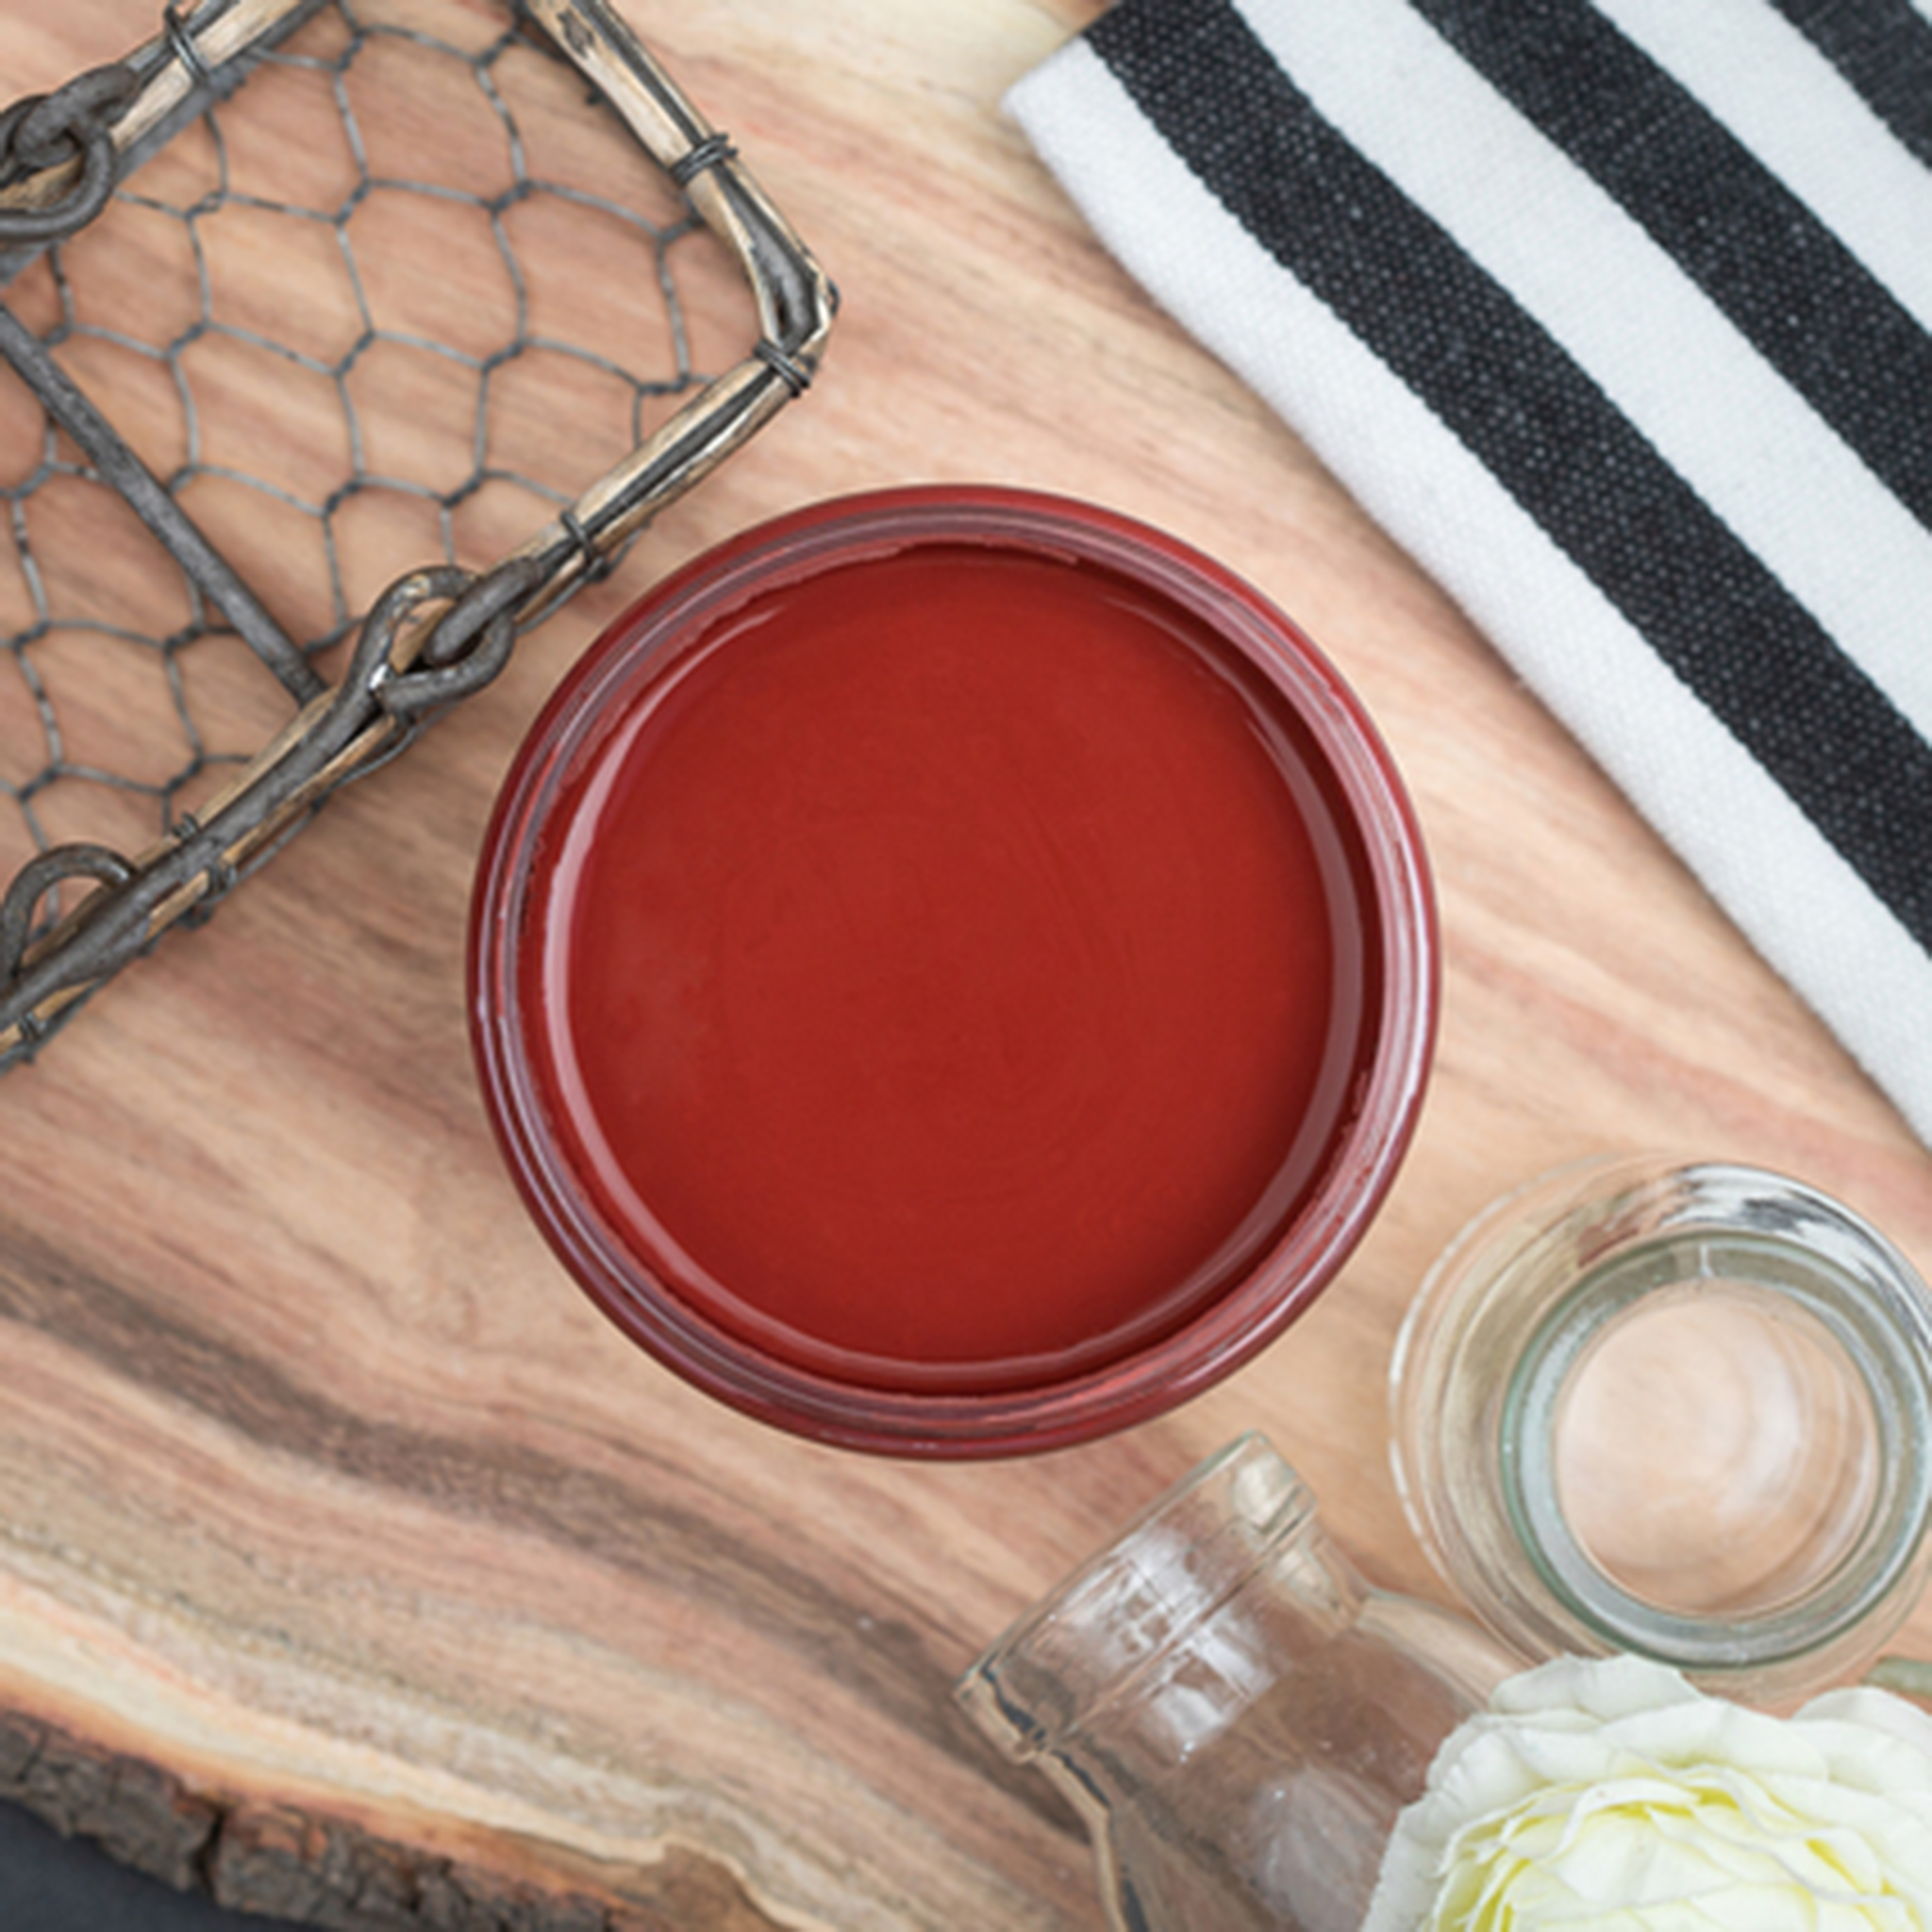 An arial view of an open container of Dixie Belle Paint Company’s Rustic Red Chalk Mineral Paint is on a wood board and surrounded by black and white striped fabric and glass bottles.